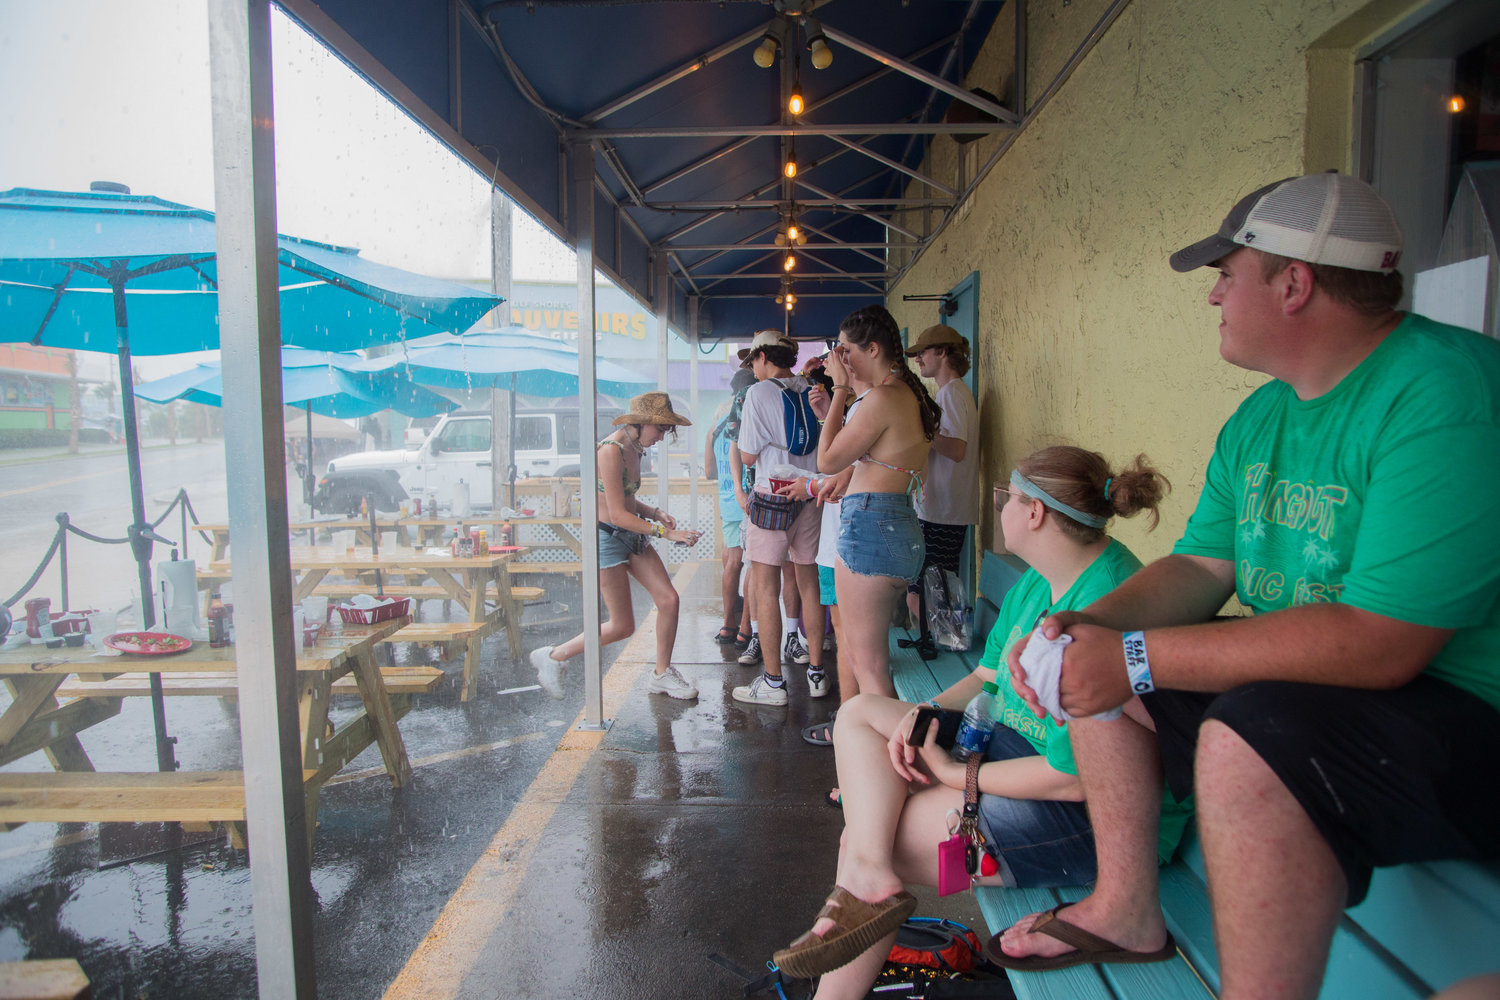 Festival goers take cover under the overhang at Shrimp Basket in Gulf Shores after being evacuated from the Hangout Music Festival site on Friday, May 20, due to lightning and severe weather.